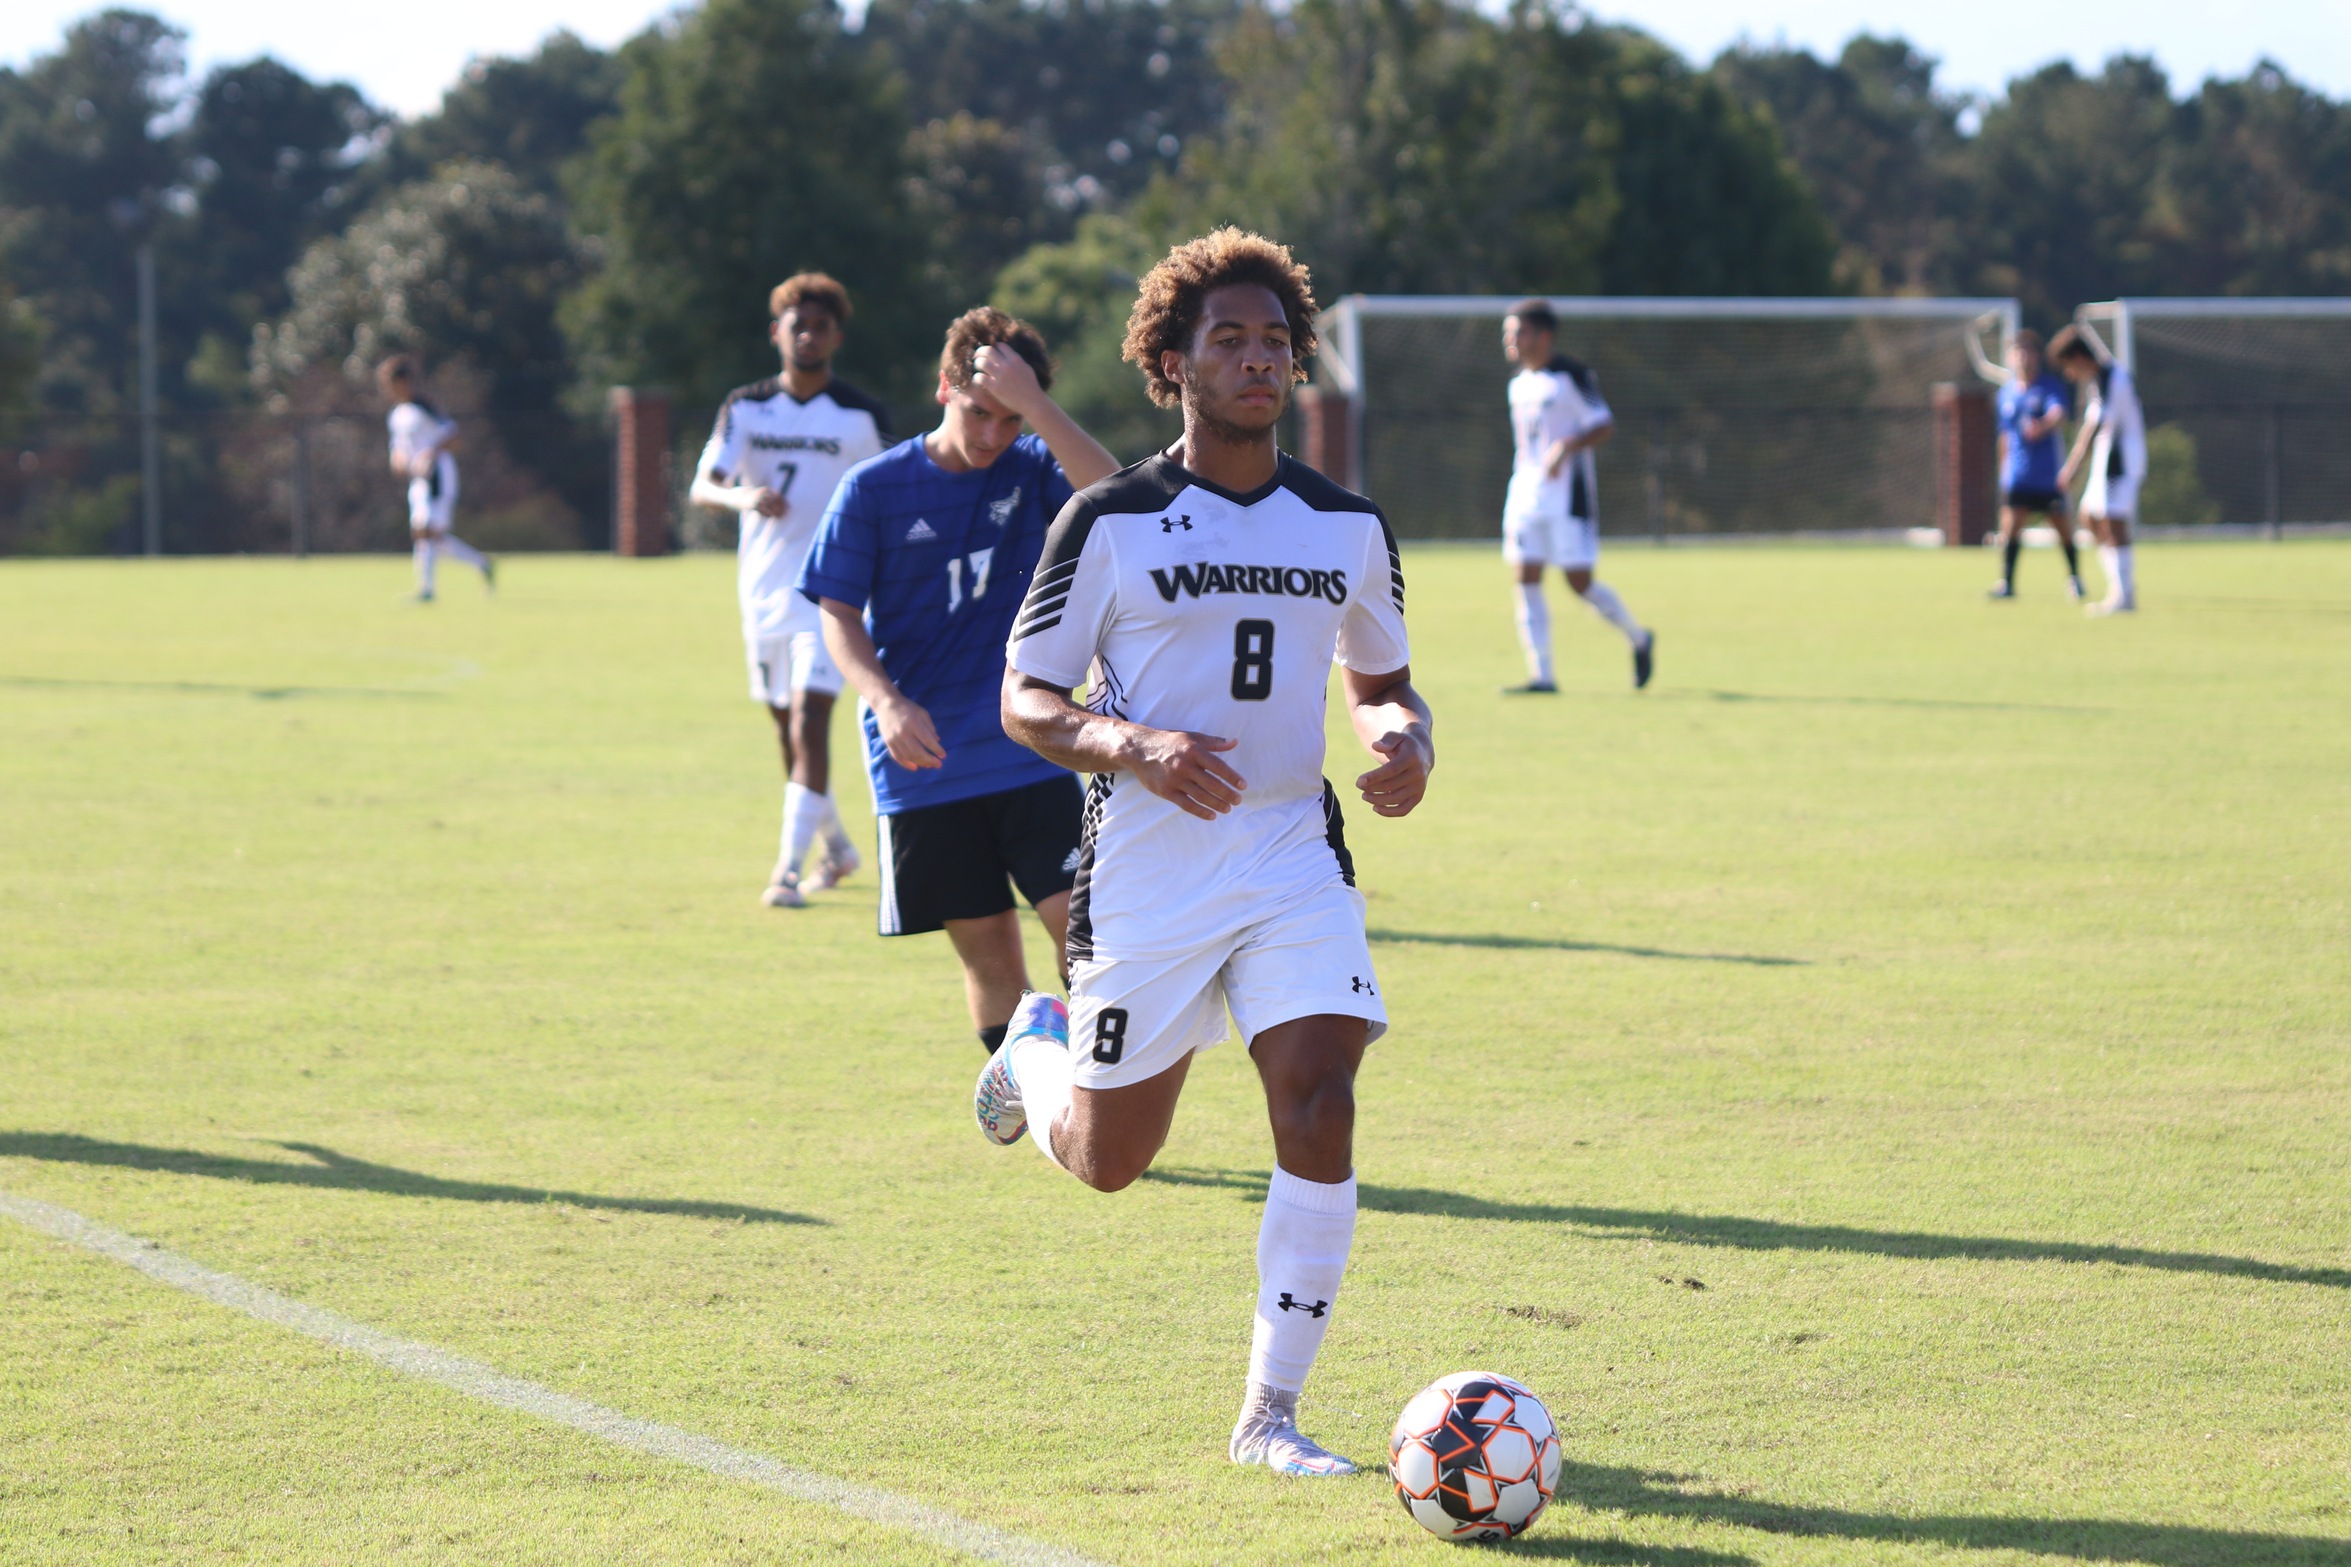 Warriors fall to Co-Lin in cross-divisional match